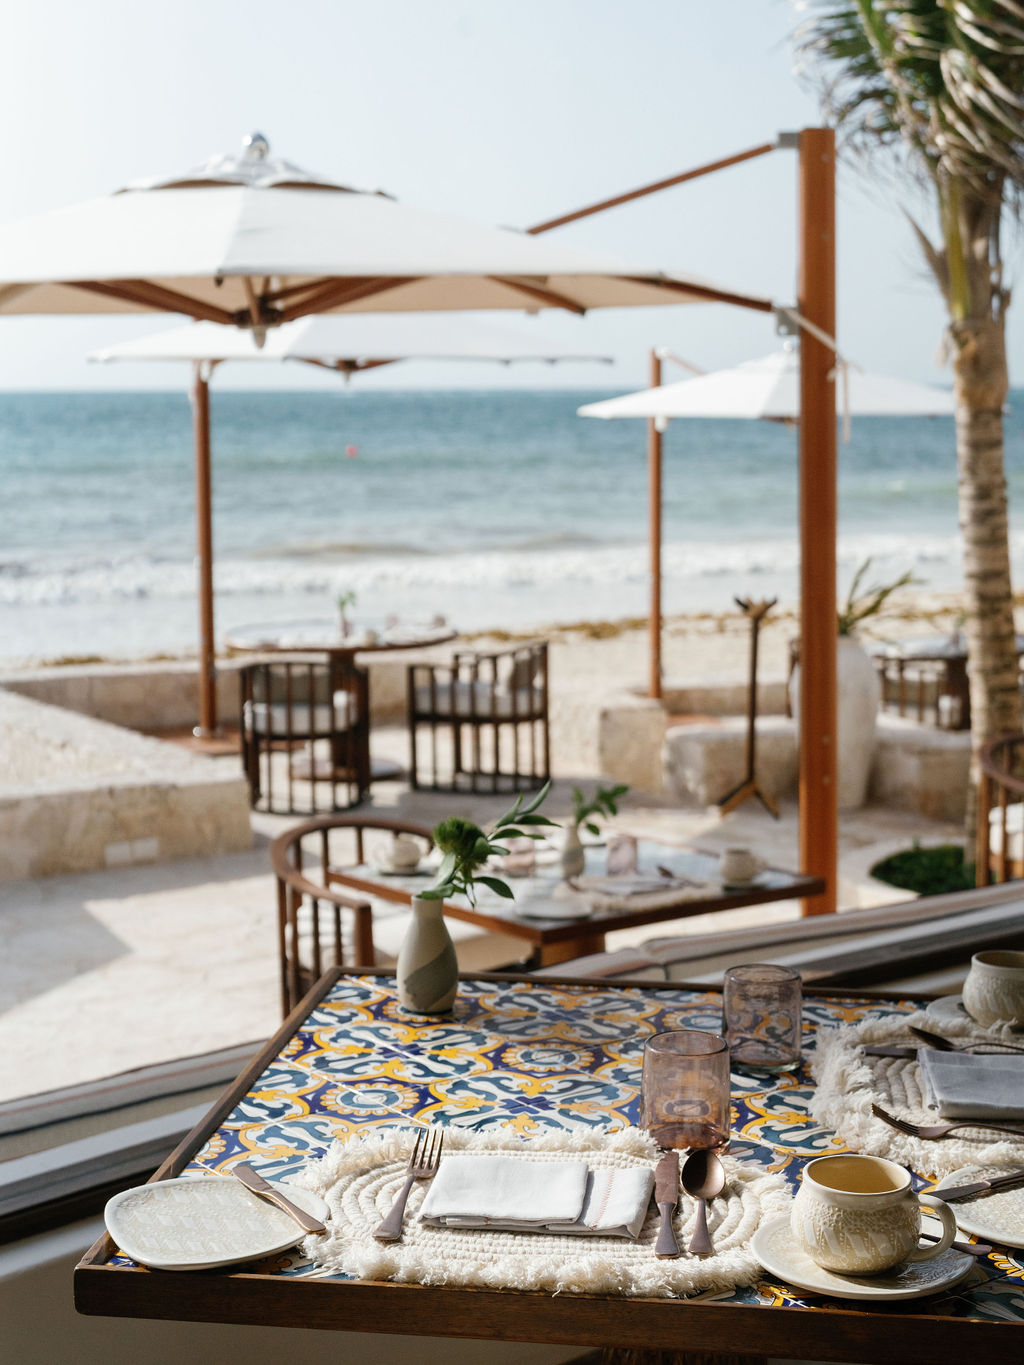 Patio at Belmond Maroma with umbrellas and tile tables